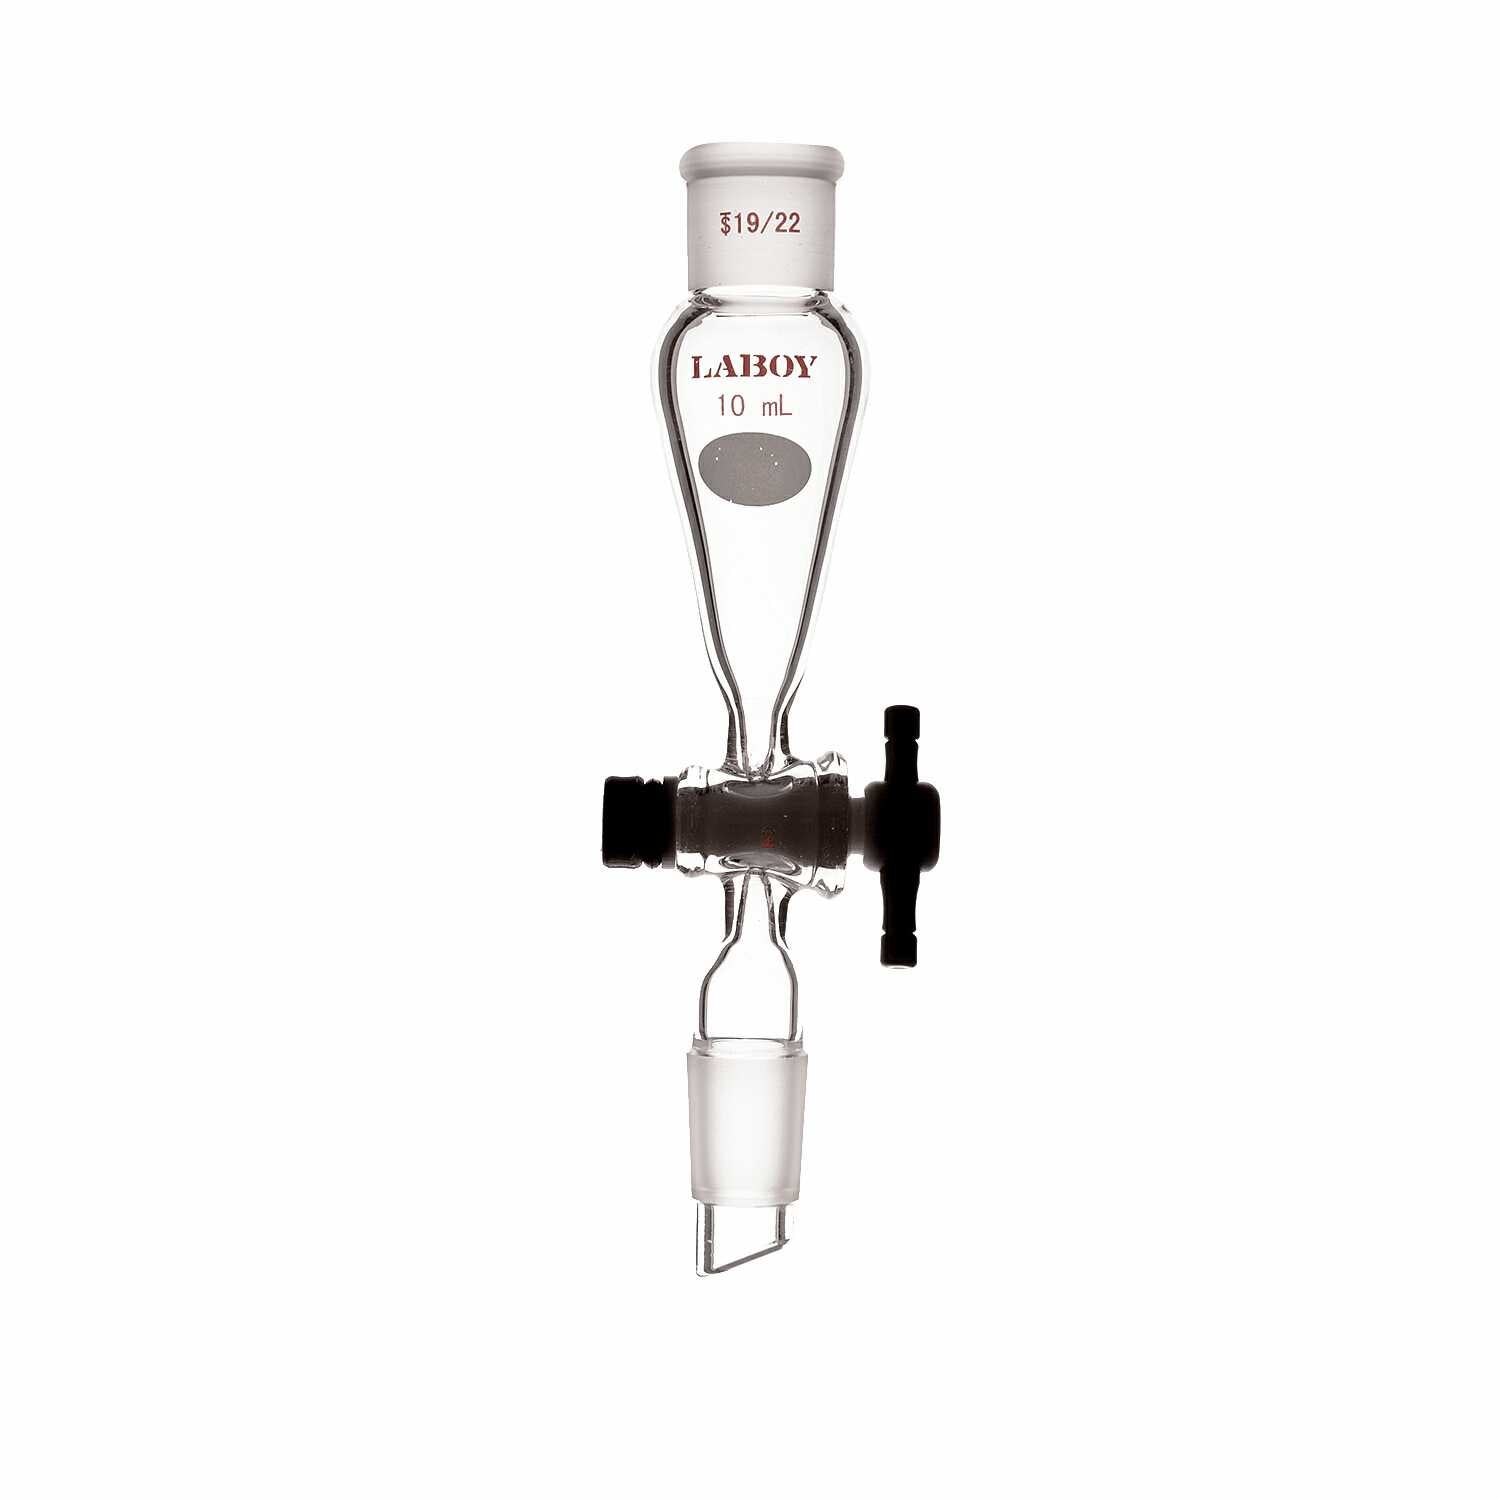 Laboy Glass High-Quality Separatory Funnel with PTFE Stopcock and Standard Taper Joints - Scienmart